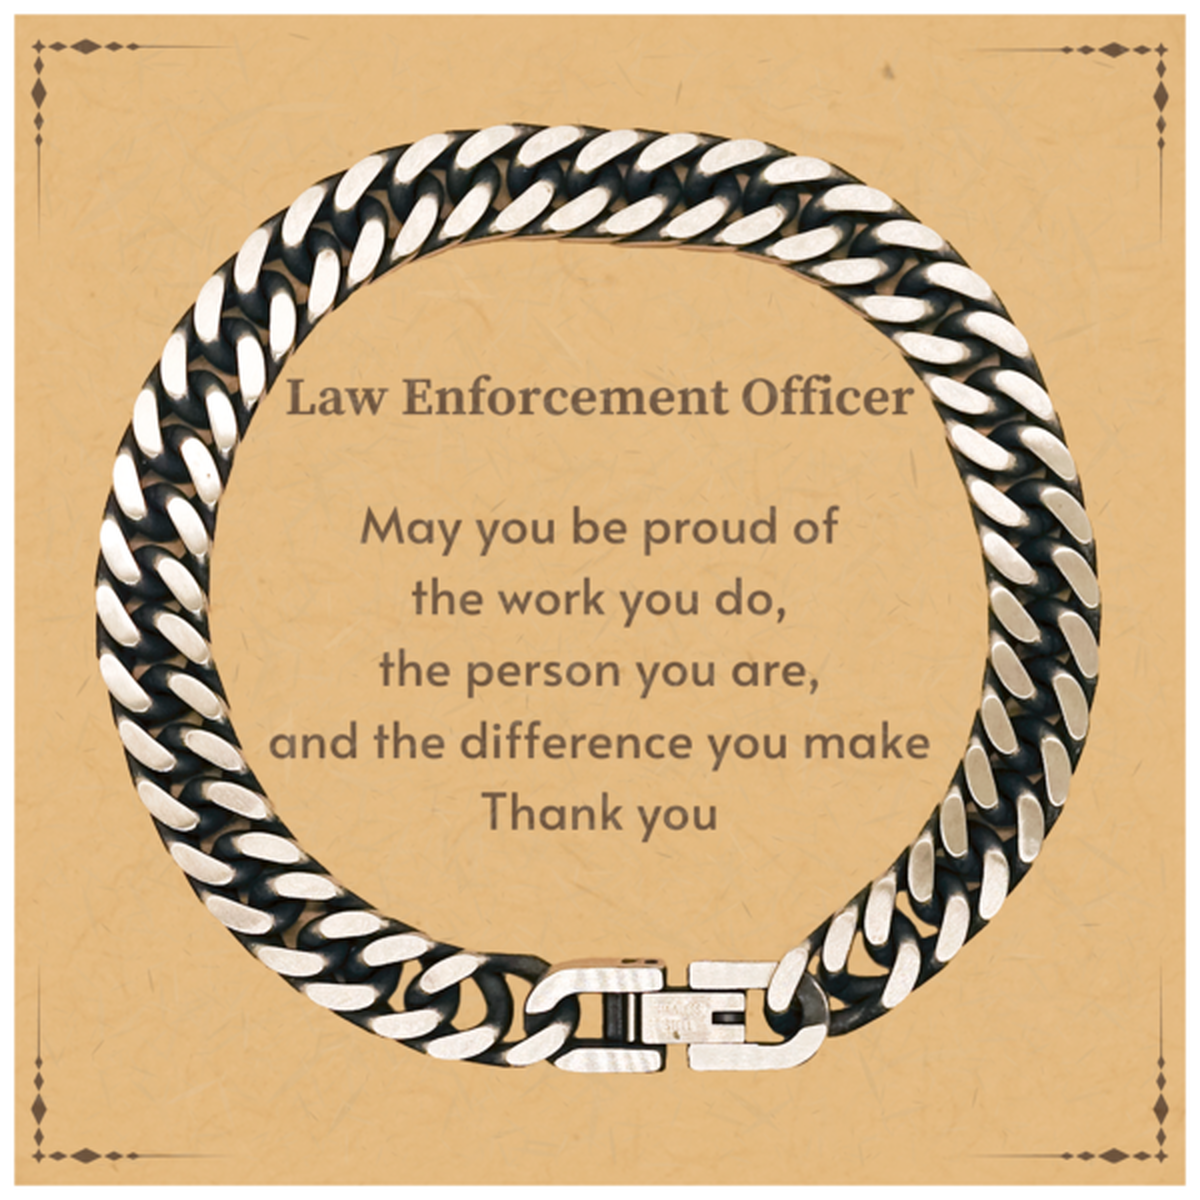 Heartwarming Cuban Link Chain Bracelet Retirement Coworkers Gifts for Law Enforcement Officer, Law Enforcement Officer May You be proud of the work you do, the person you are Gifts for Boss Men Women Friends